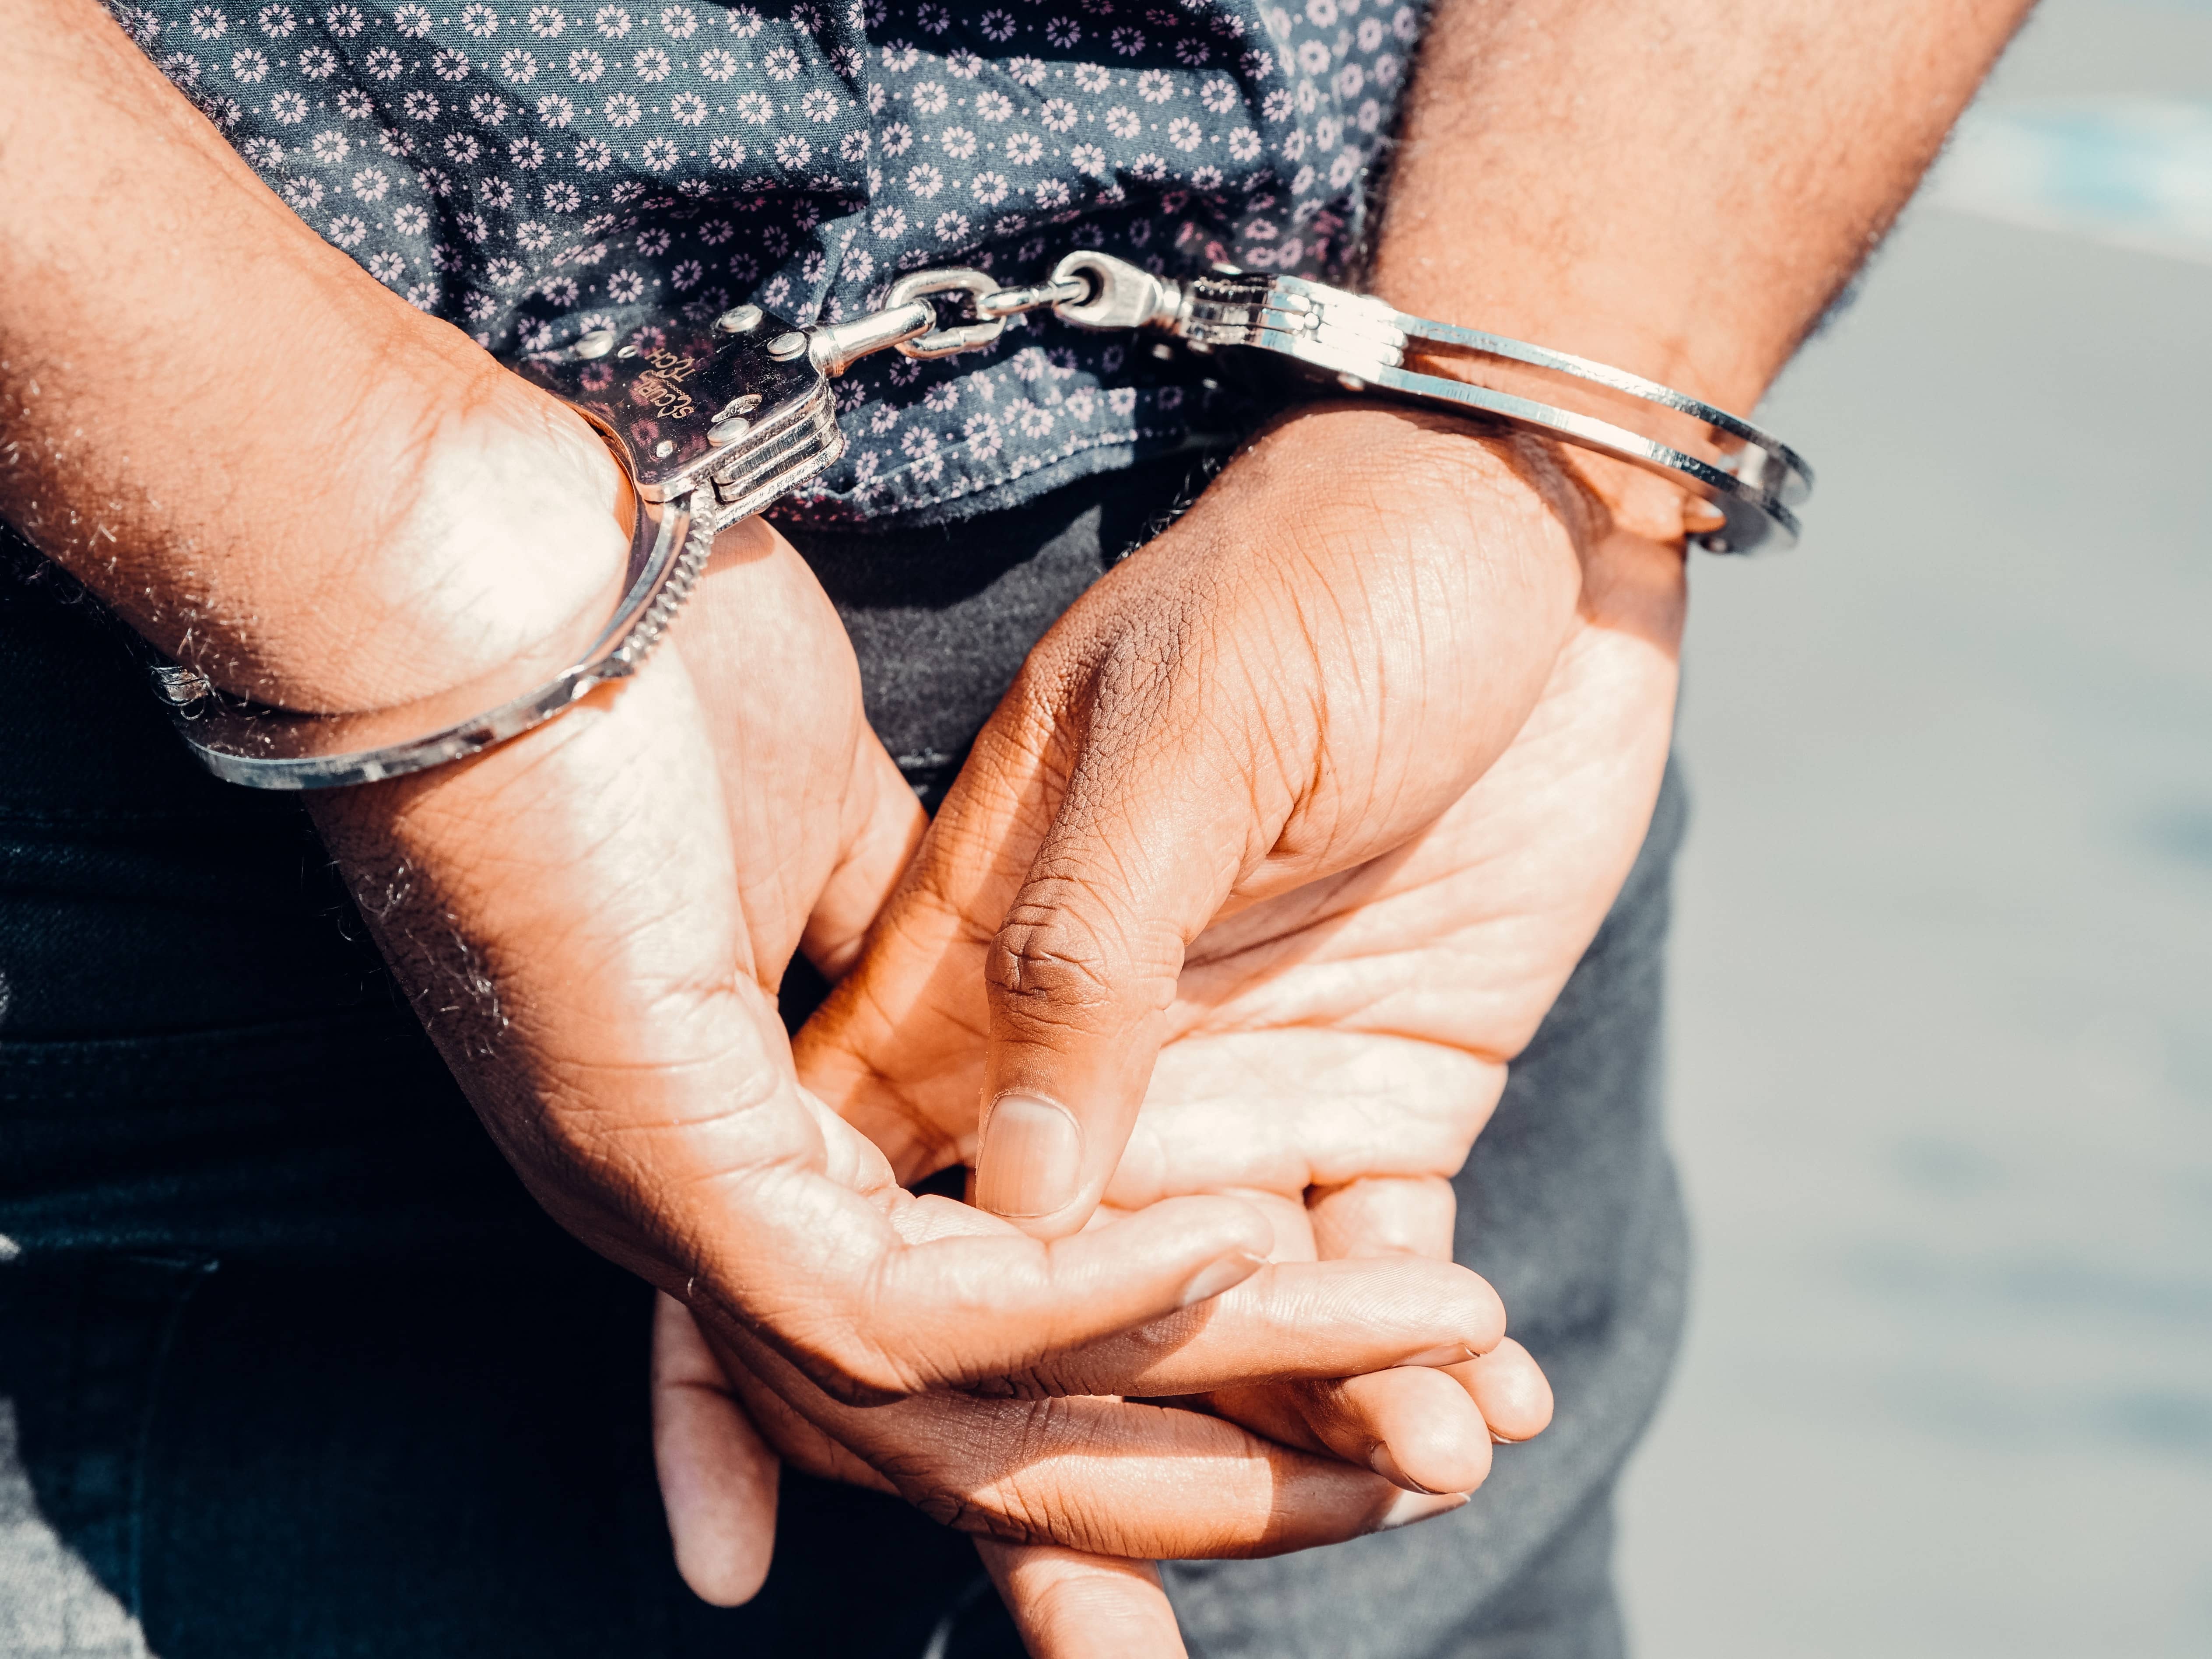 [A criminal being arrested. Photo Credits to Pexels]